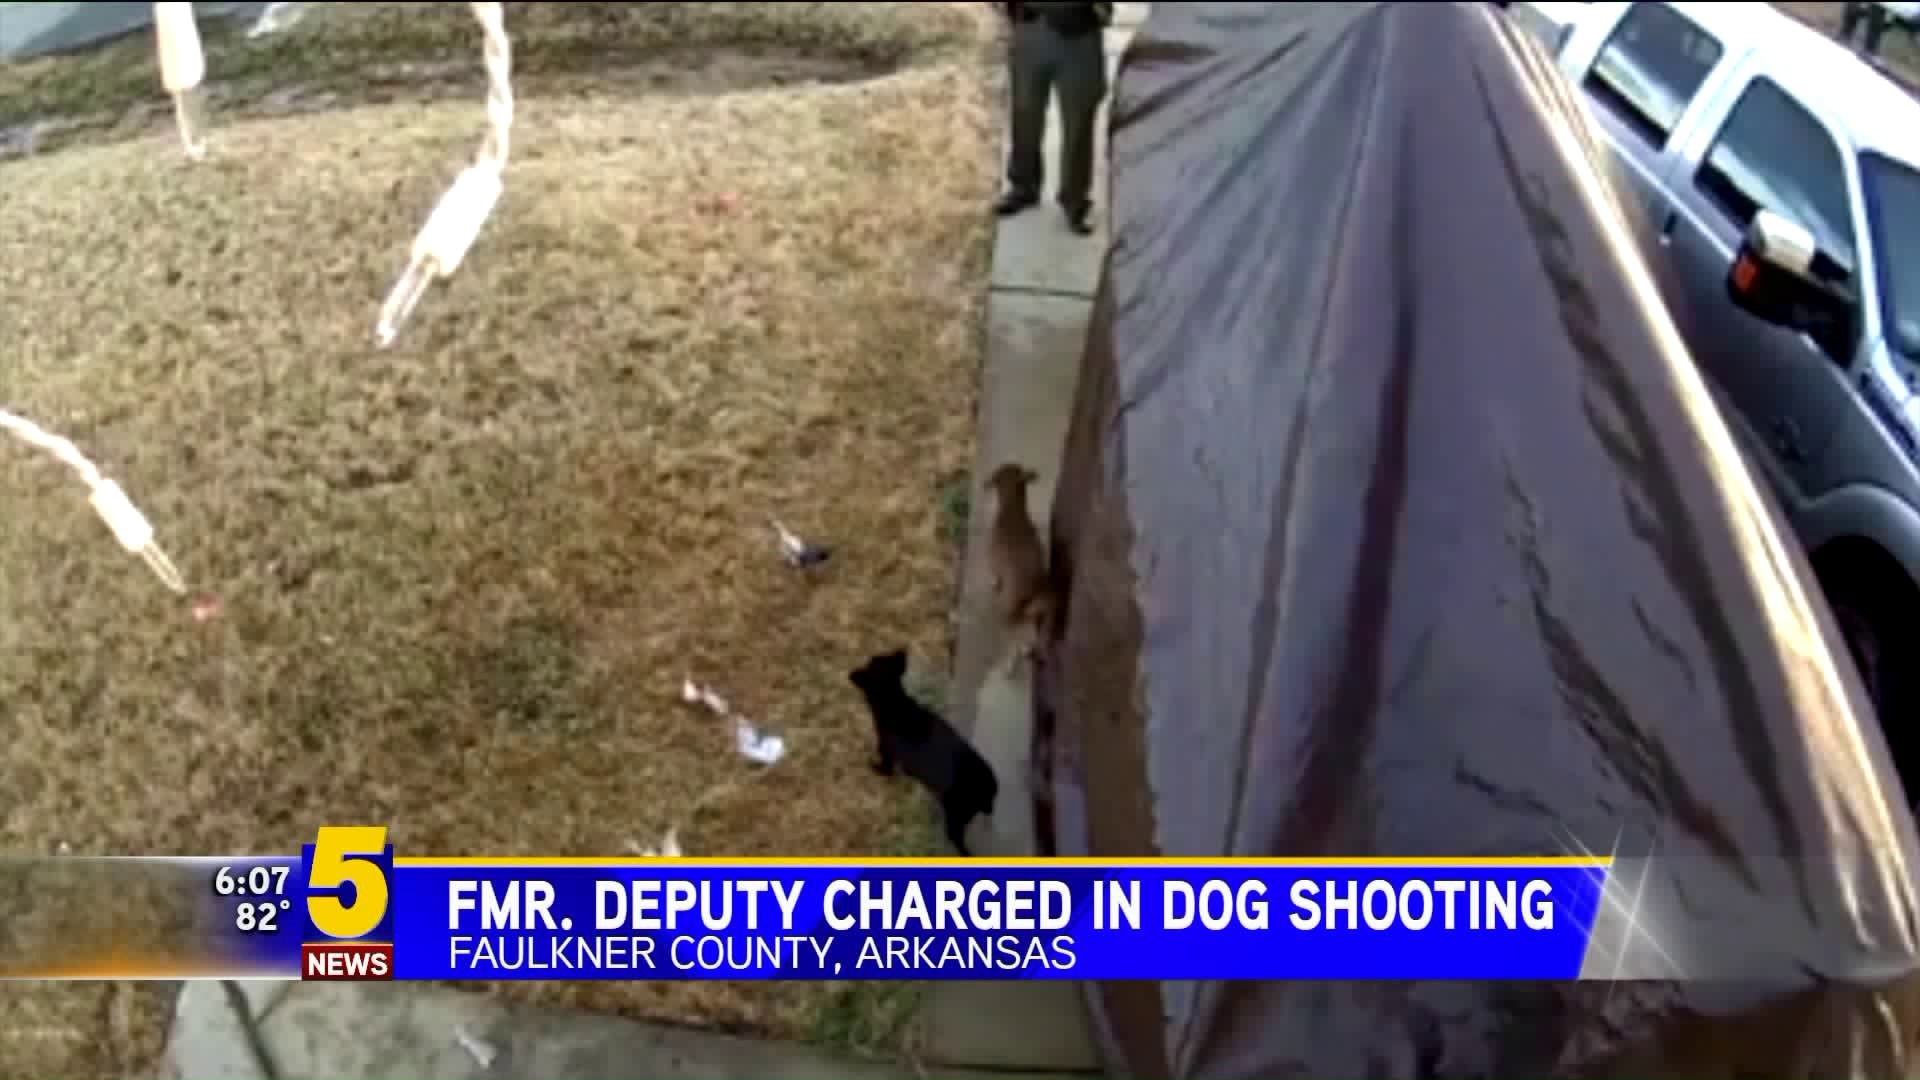 Former Faulkner County Deputy Charged in Dog Shooting